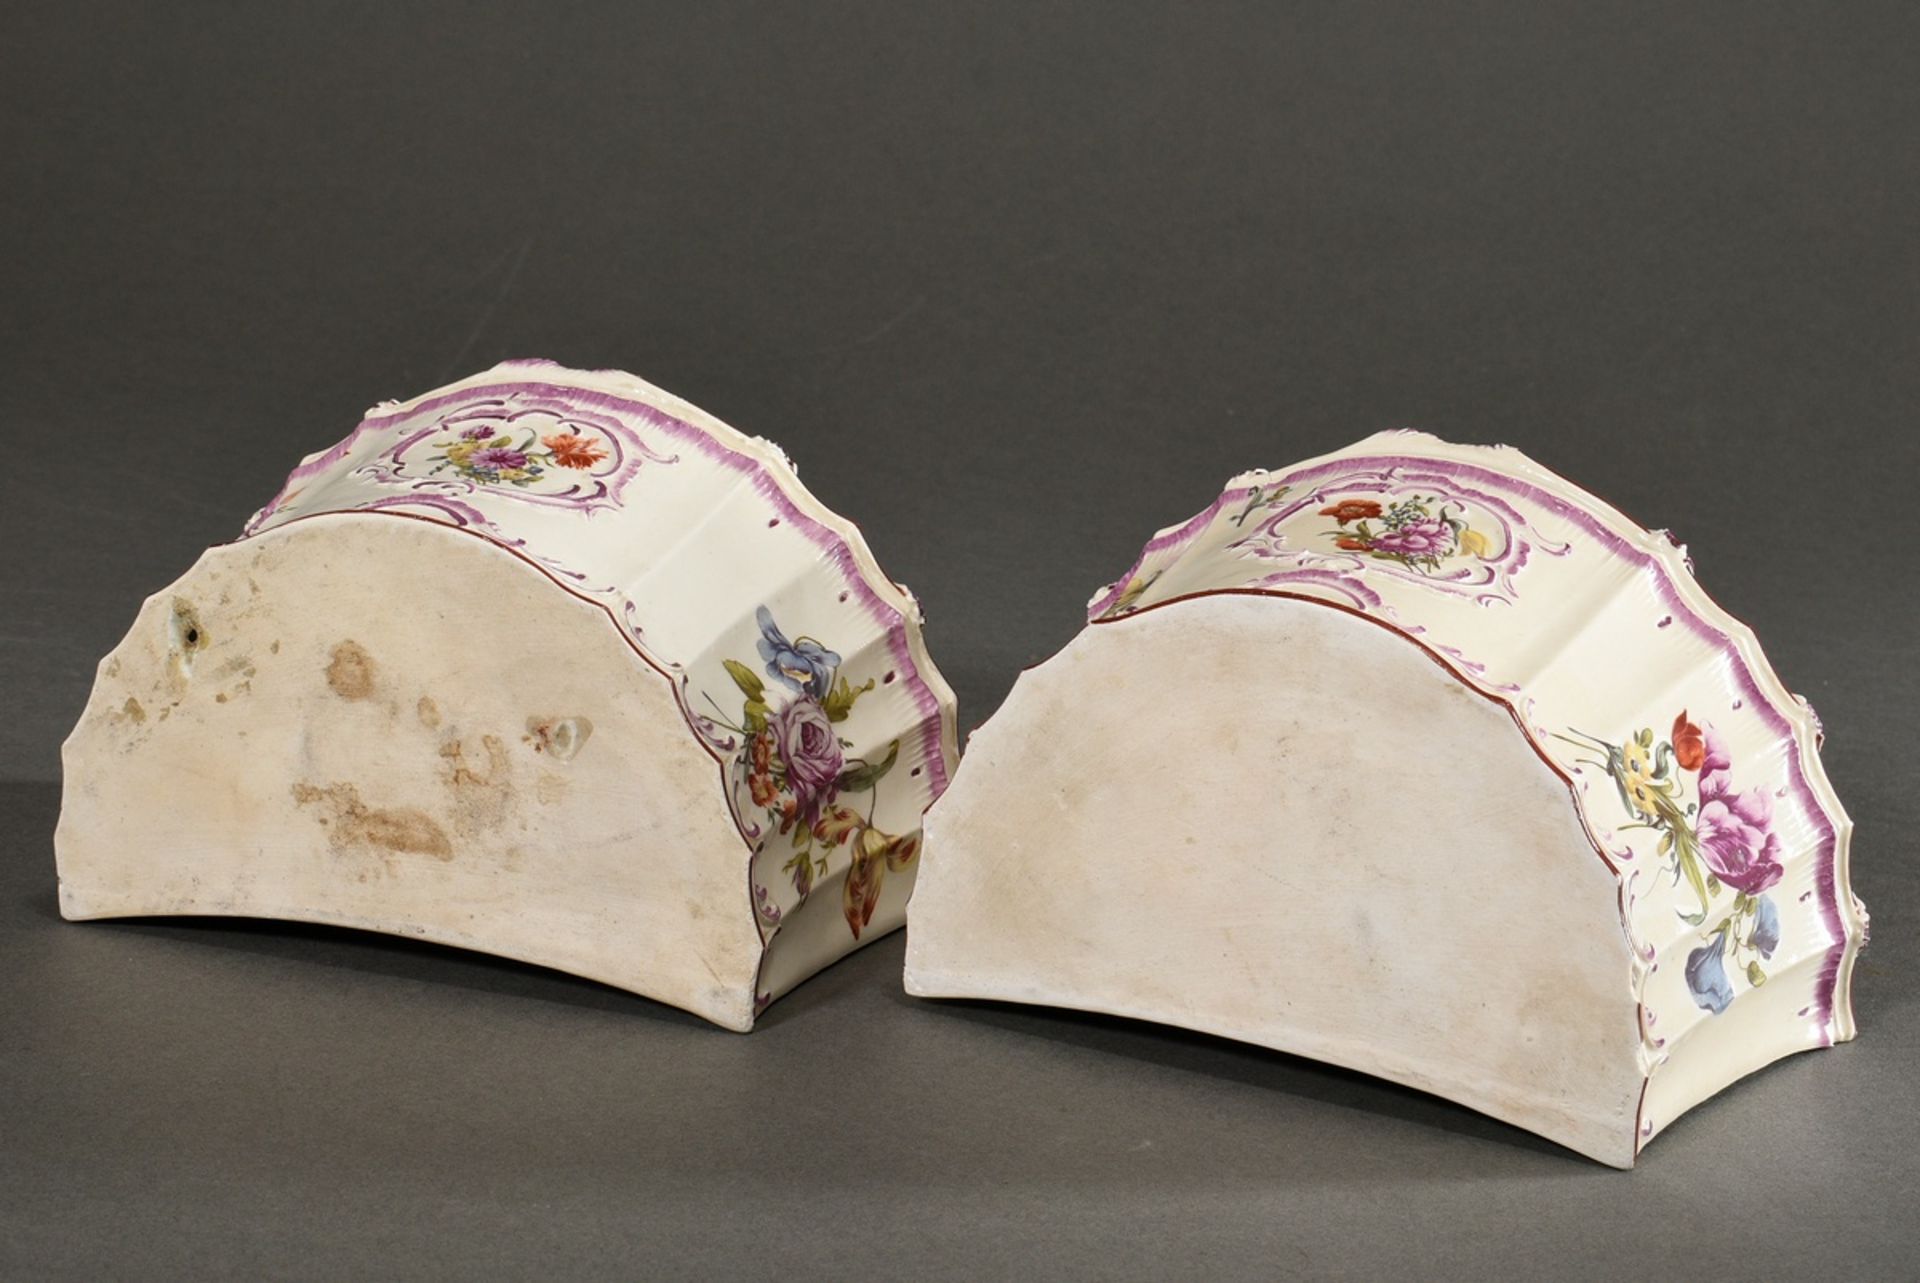 Pair of porcelain jardinières with rocailles in relief and polychrome flower painting, Ludwigsburg  - Image 5 of 8